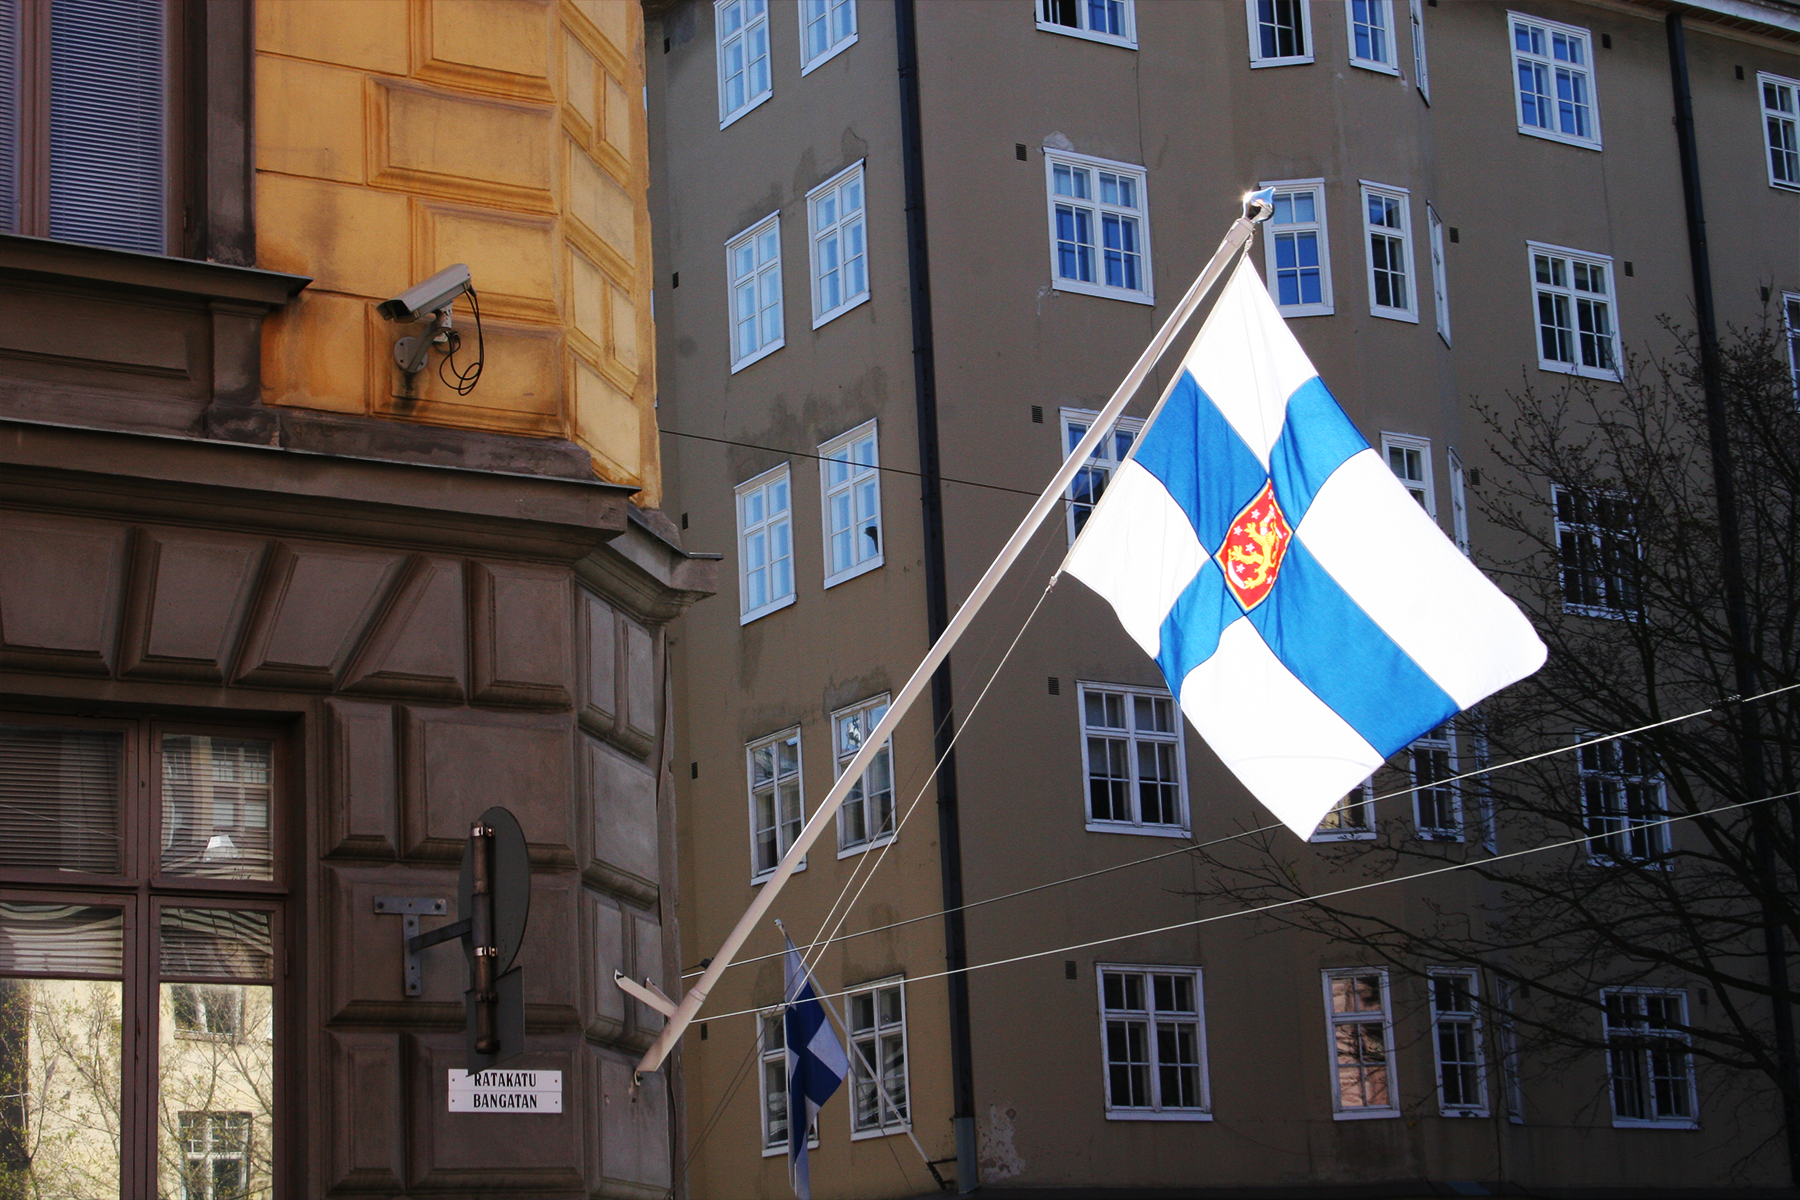  Illustration - Supo´s headquarters in Helsinki with a national Finnish flag.